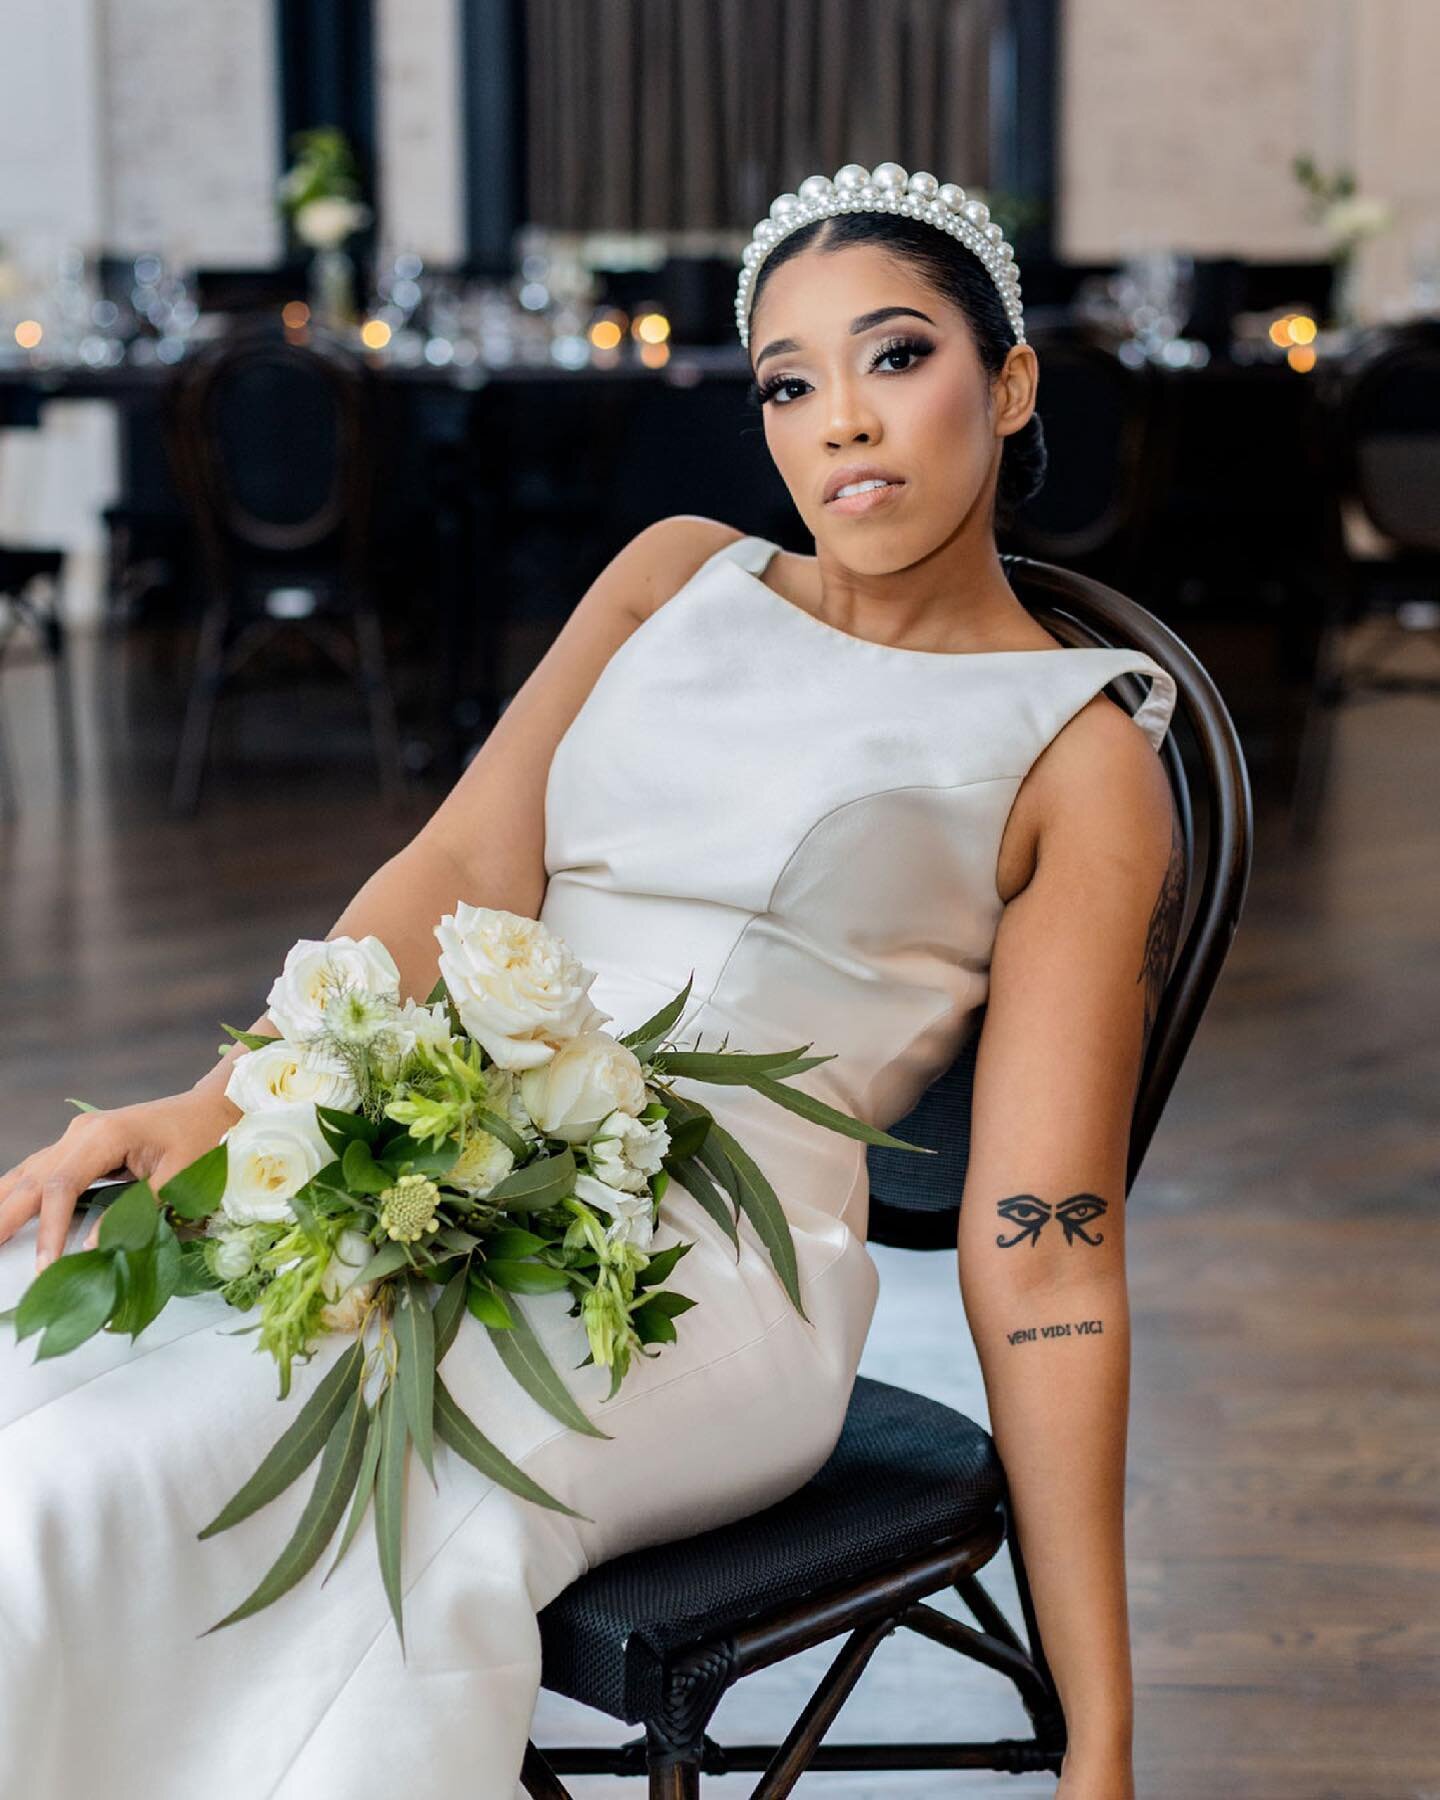 Now this is a bridal look 👏🏾😍. The hair, makeup and dress is just so perfect together! 

Venue: @themasondallas
Planner: @nxtlvlhouston
Makeup: @khbeautymua
Dress: @impressionbridalstores
Florals: @wildwoodwedtx
Florals: @freedomfloraltx